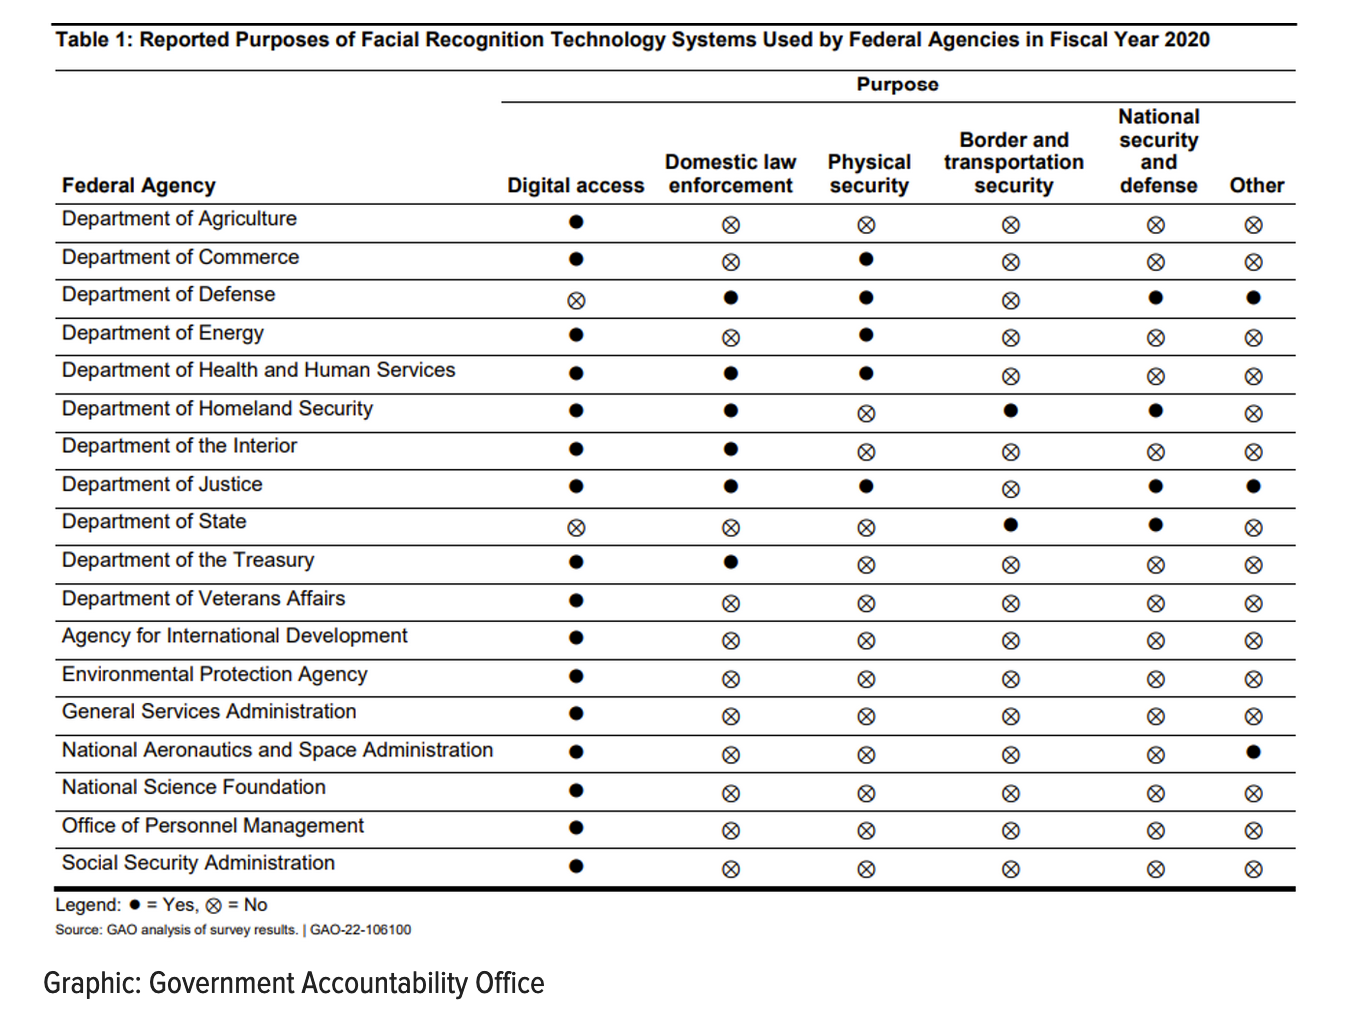 A chart listing 15 government agencies and how they use facial recognition, from Government Accountability Office